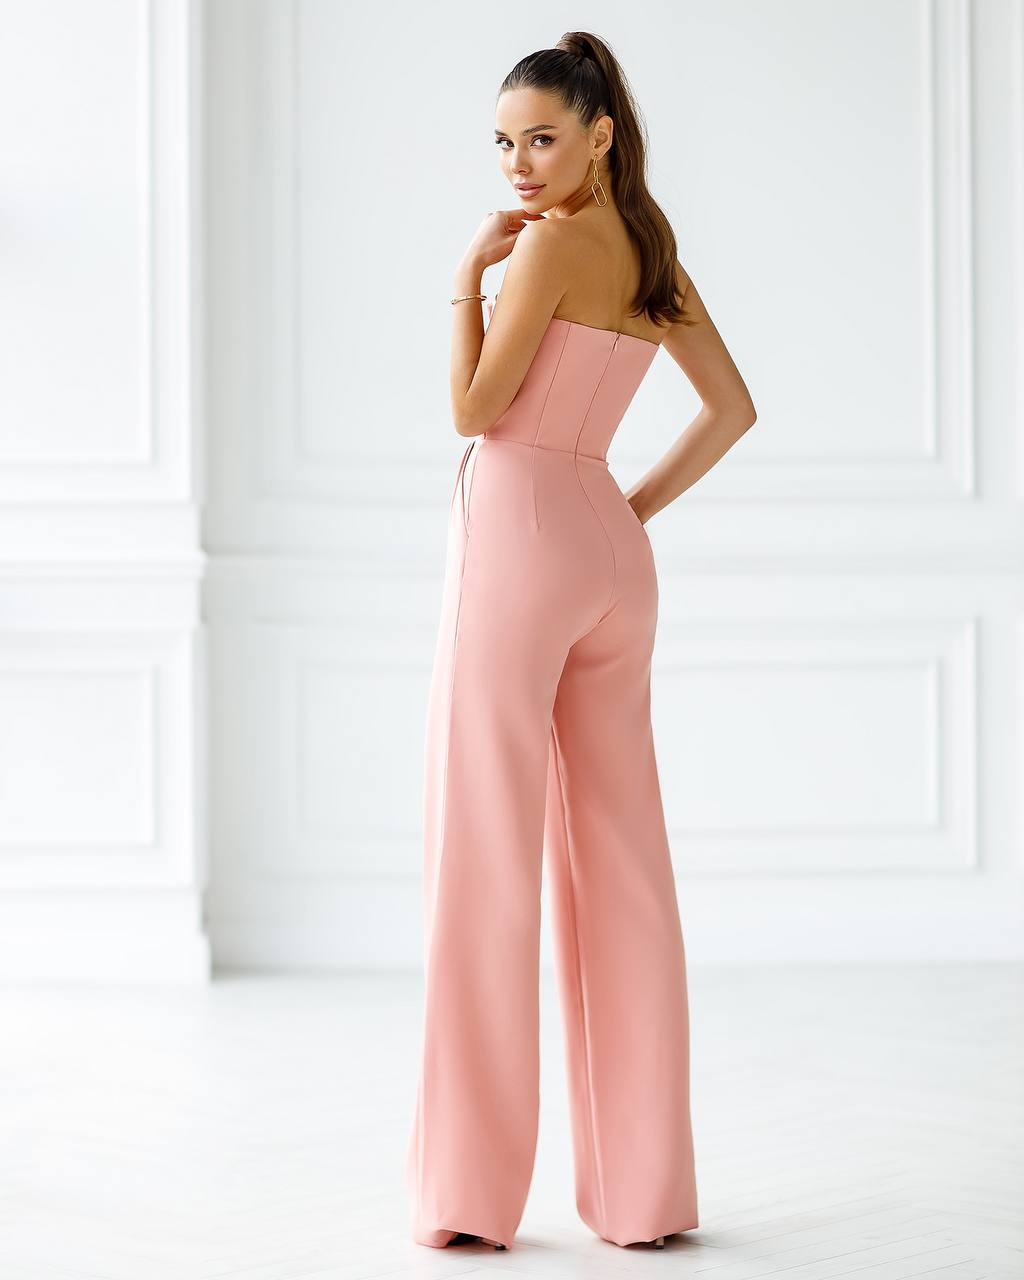 a woman in a pink jumpsuit posing for the camera